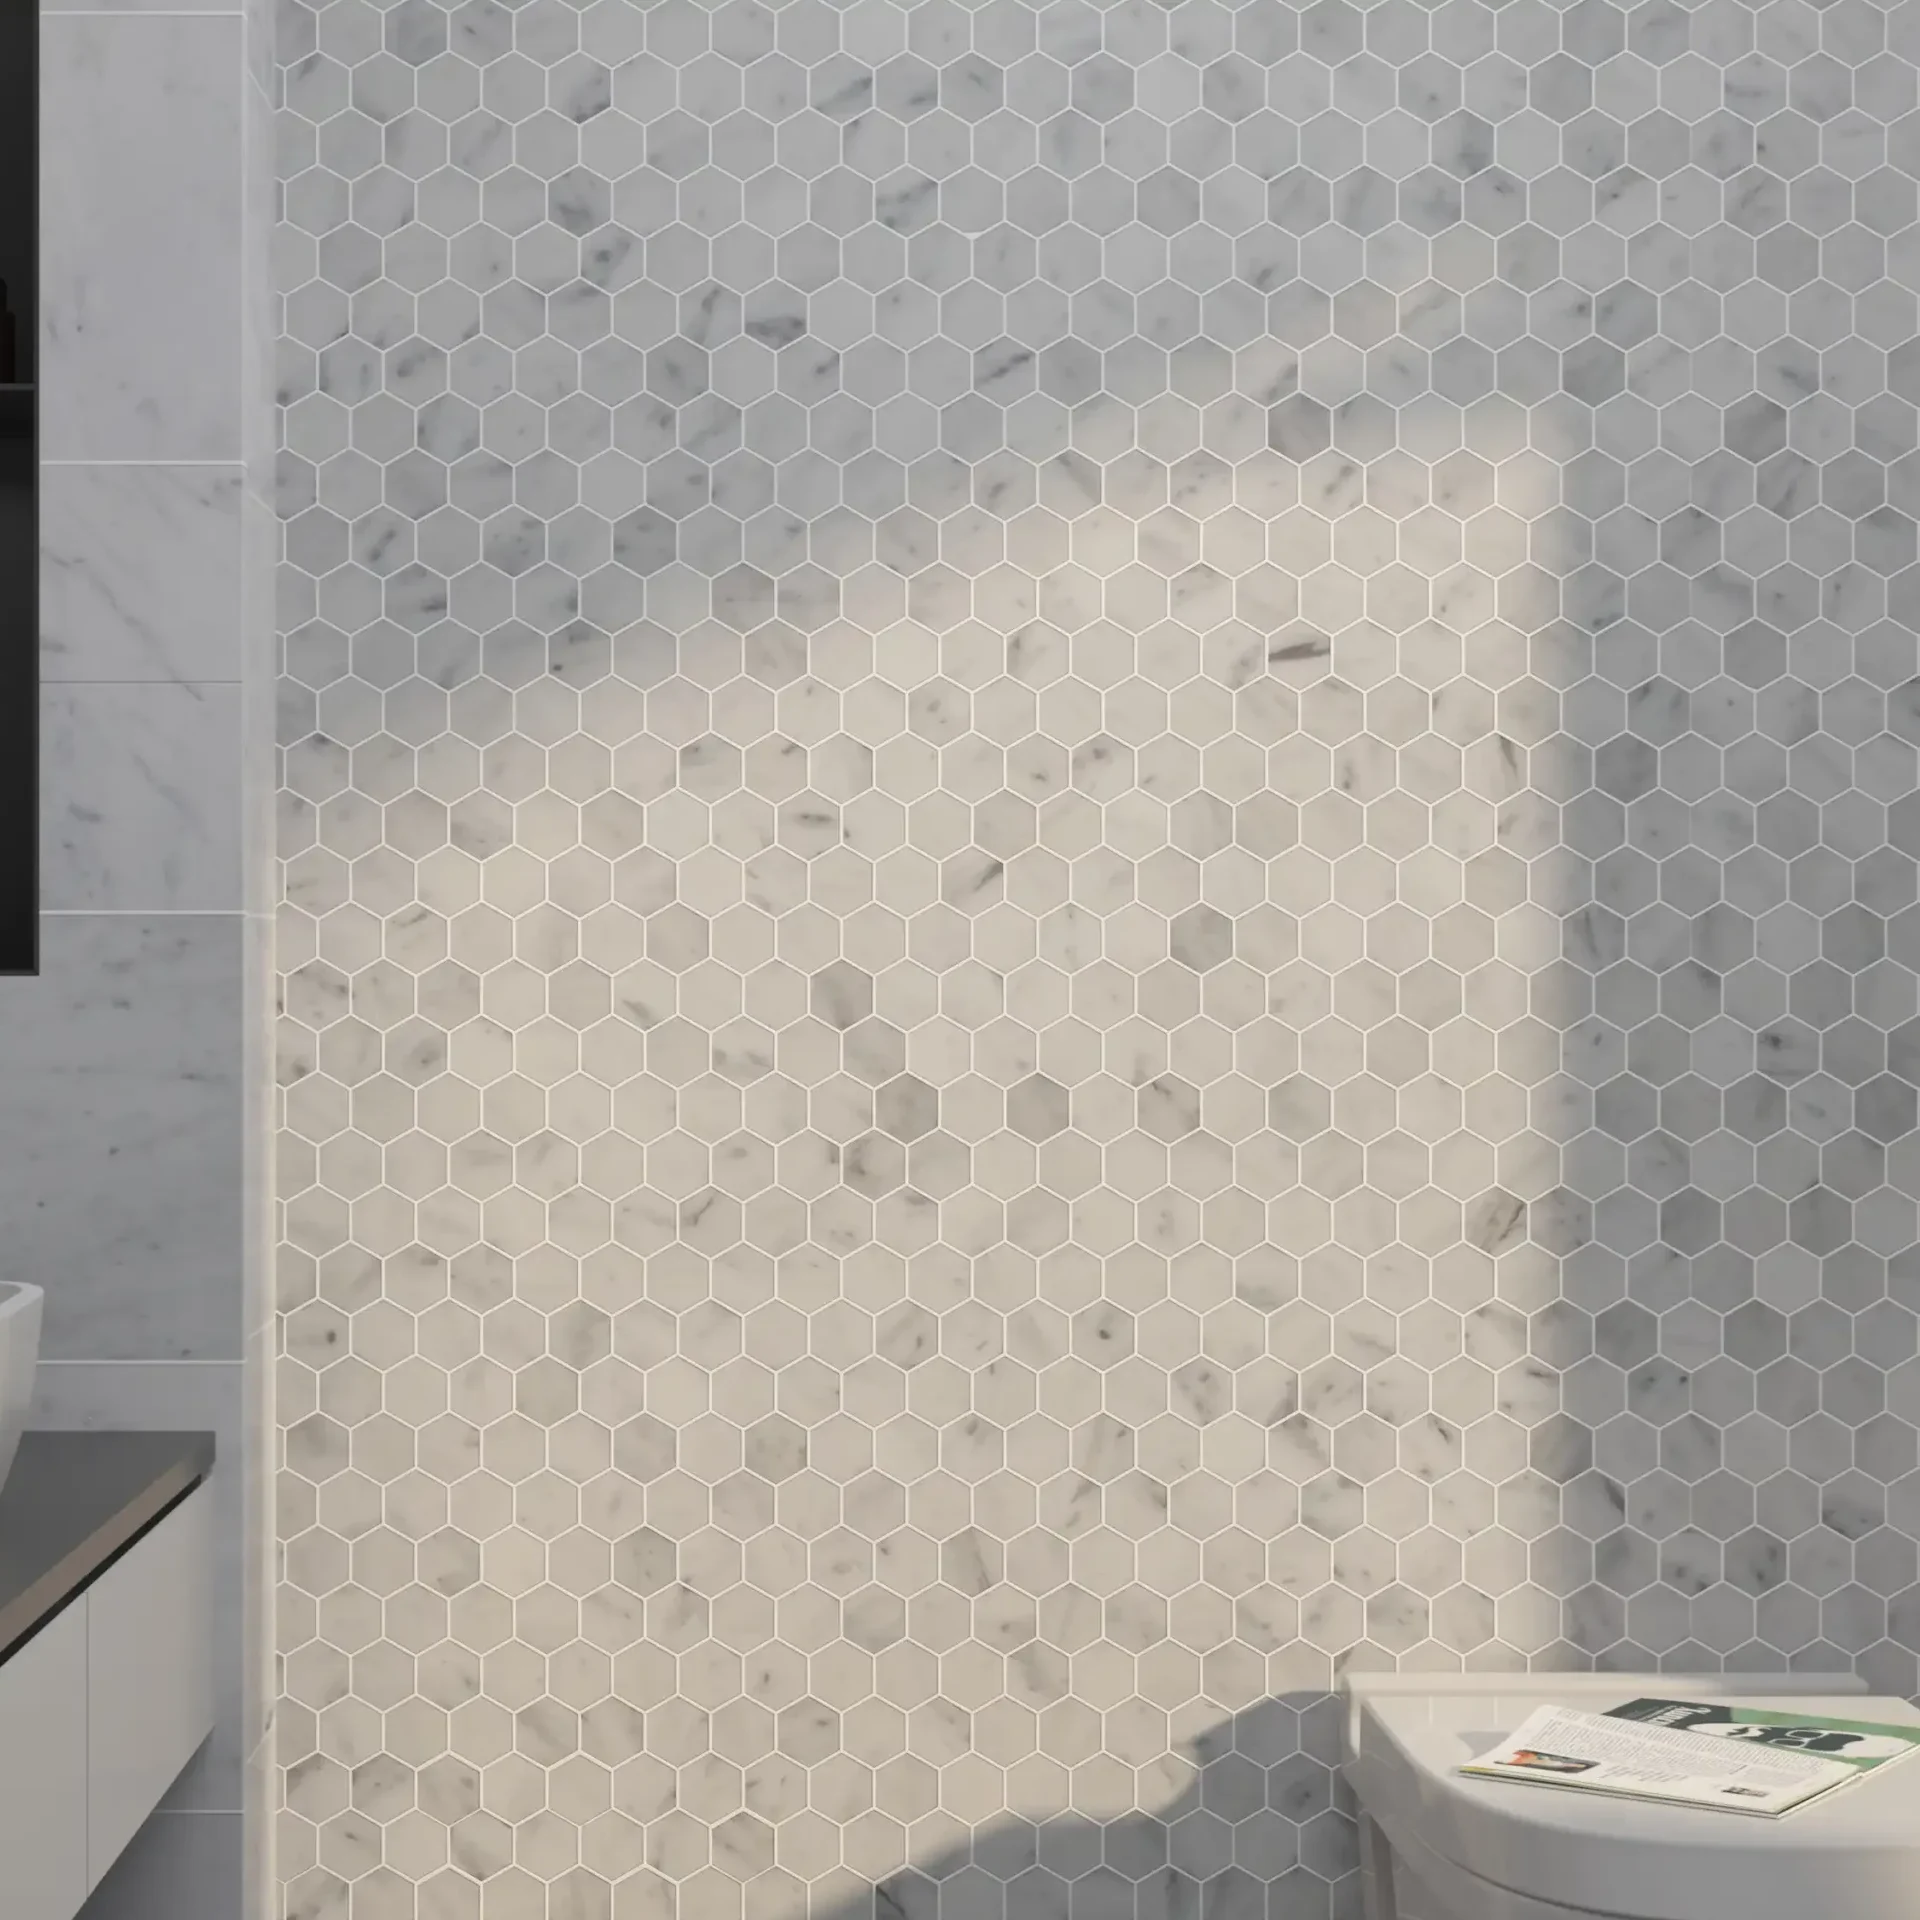 Bathroom wall with installed 2x2 Marble Honed Hexagon Mosaic Tile